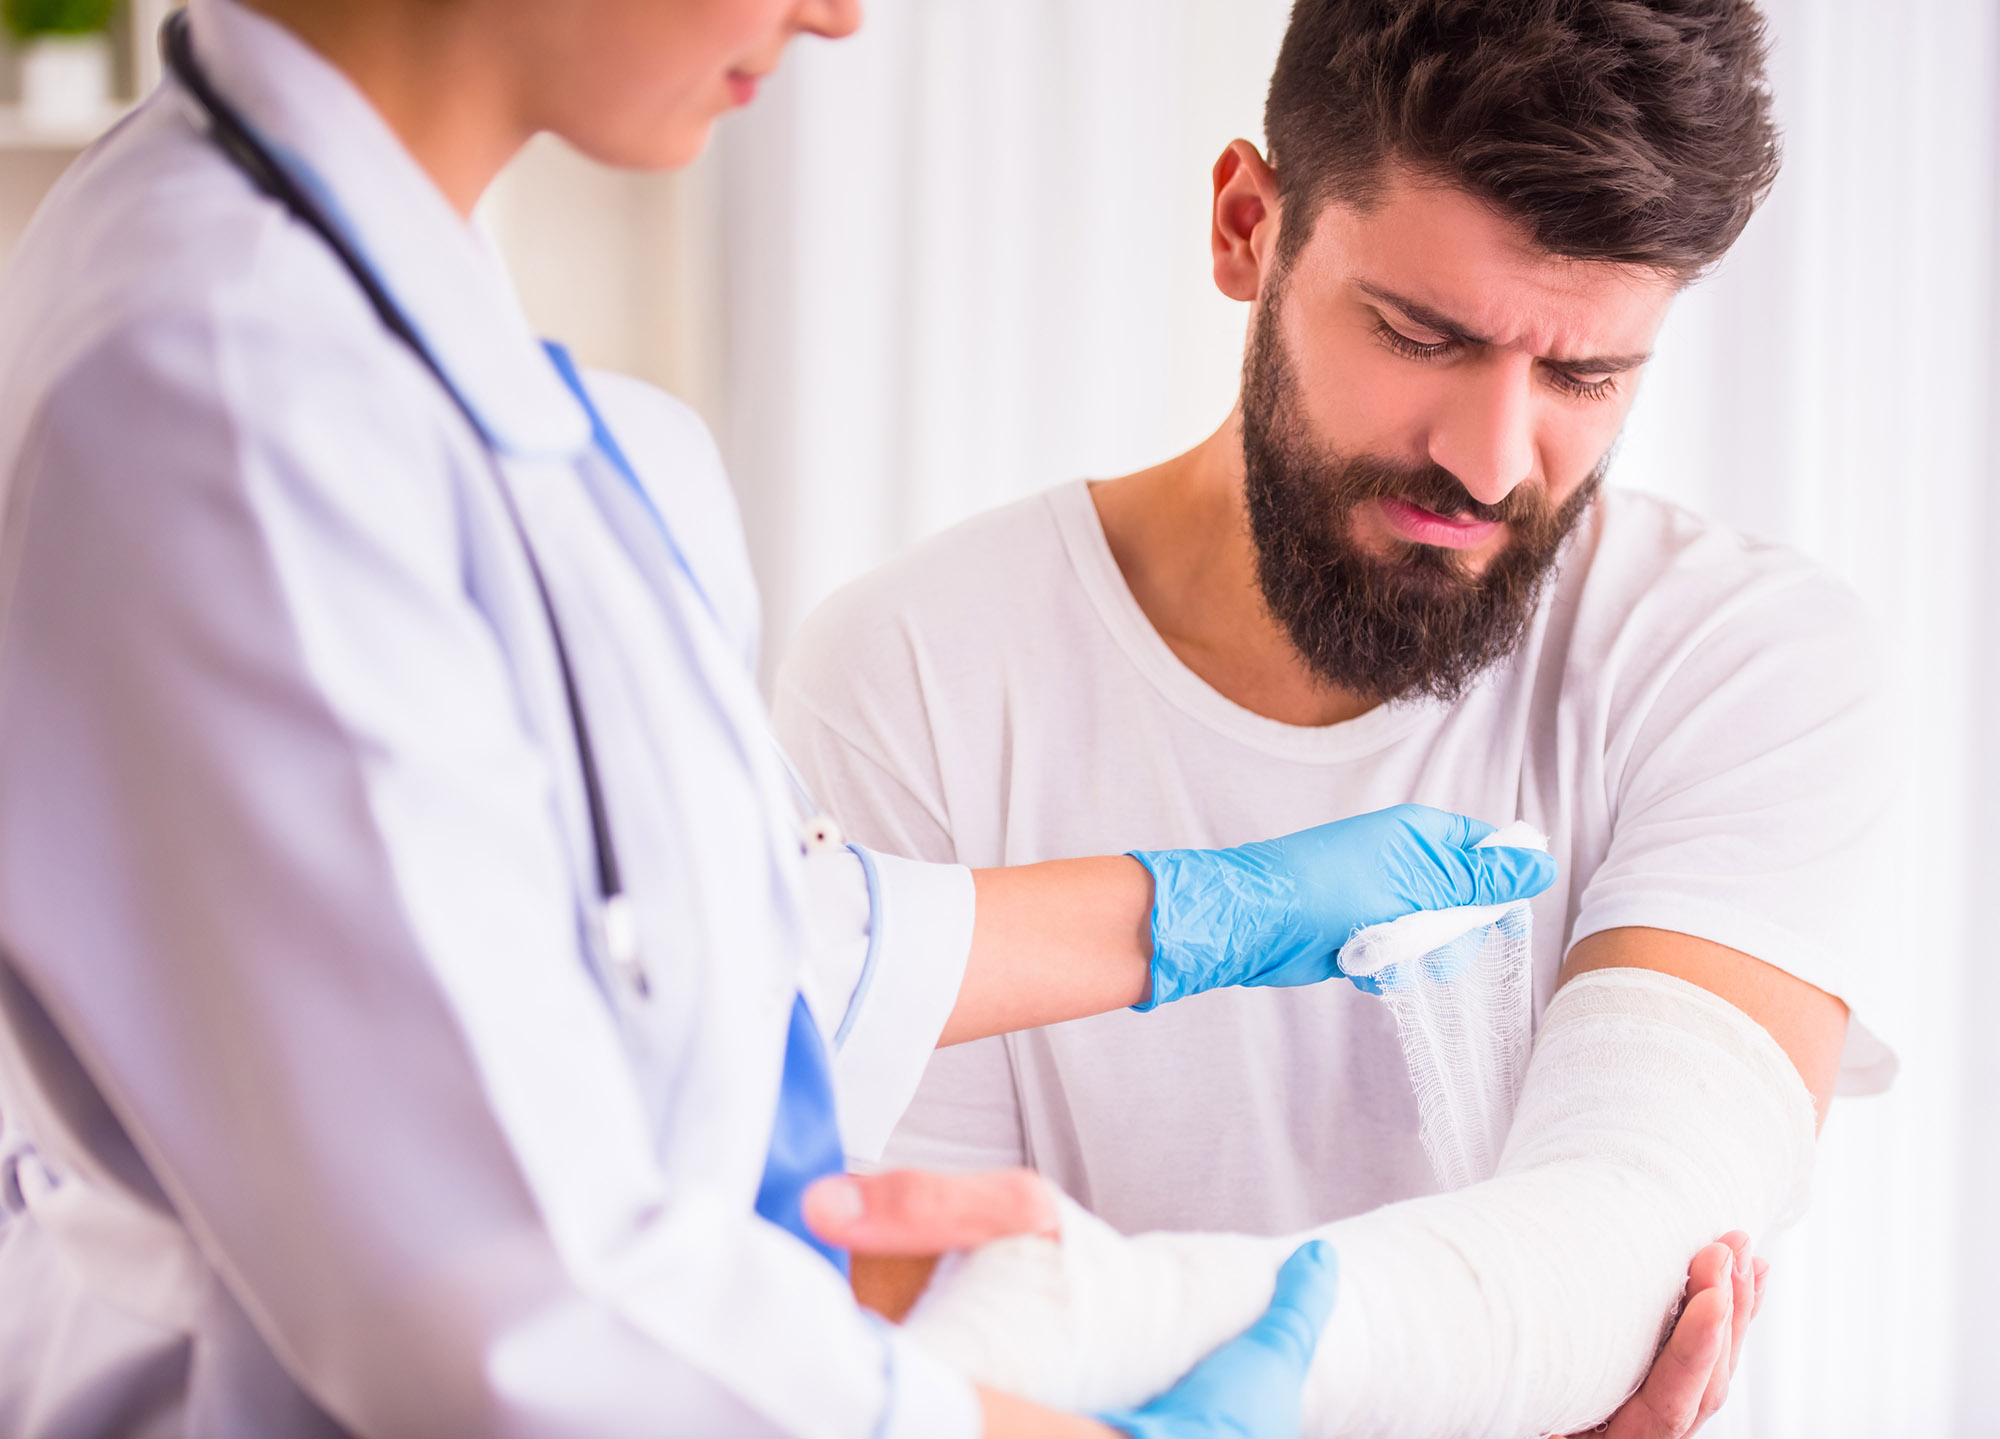 Injury arm compensation claim solicitors Wakefield